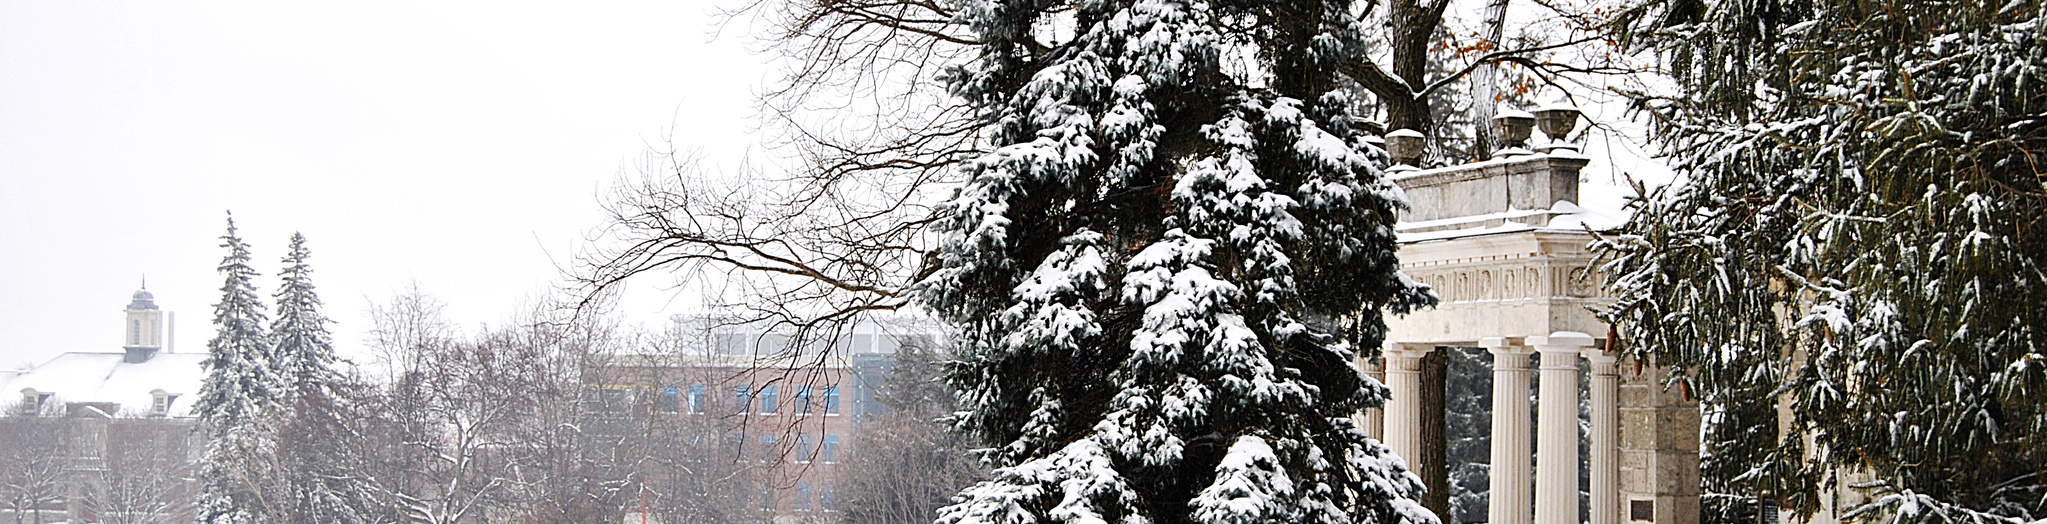 U of G campus image of stone structure with large pine trees surrounding. A blanket of snow covers everything.